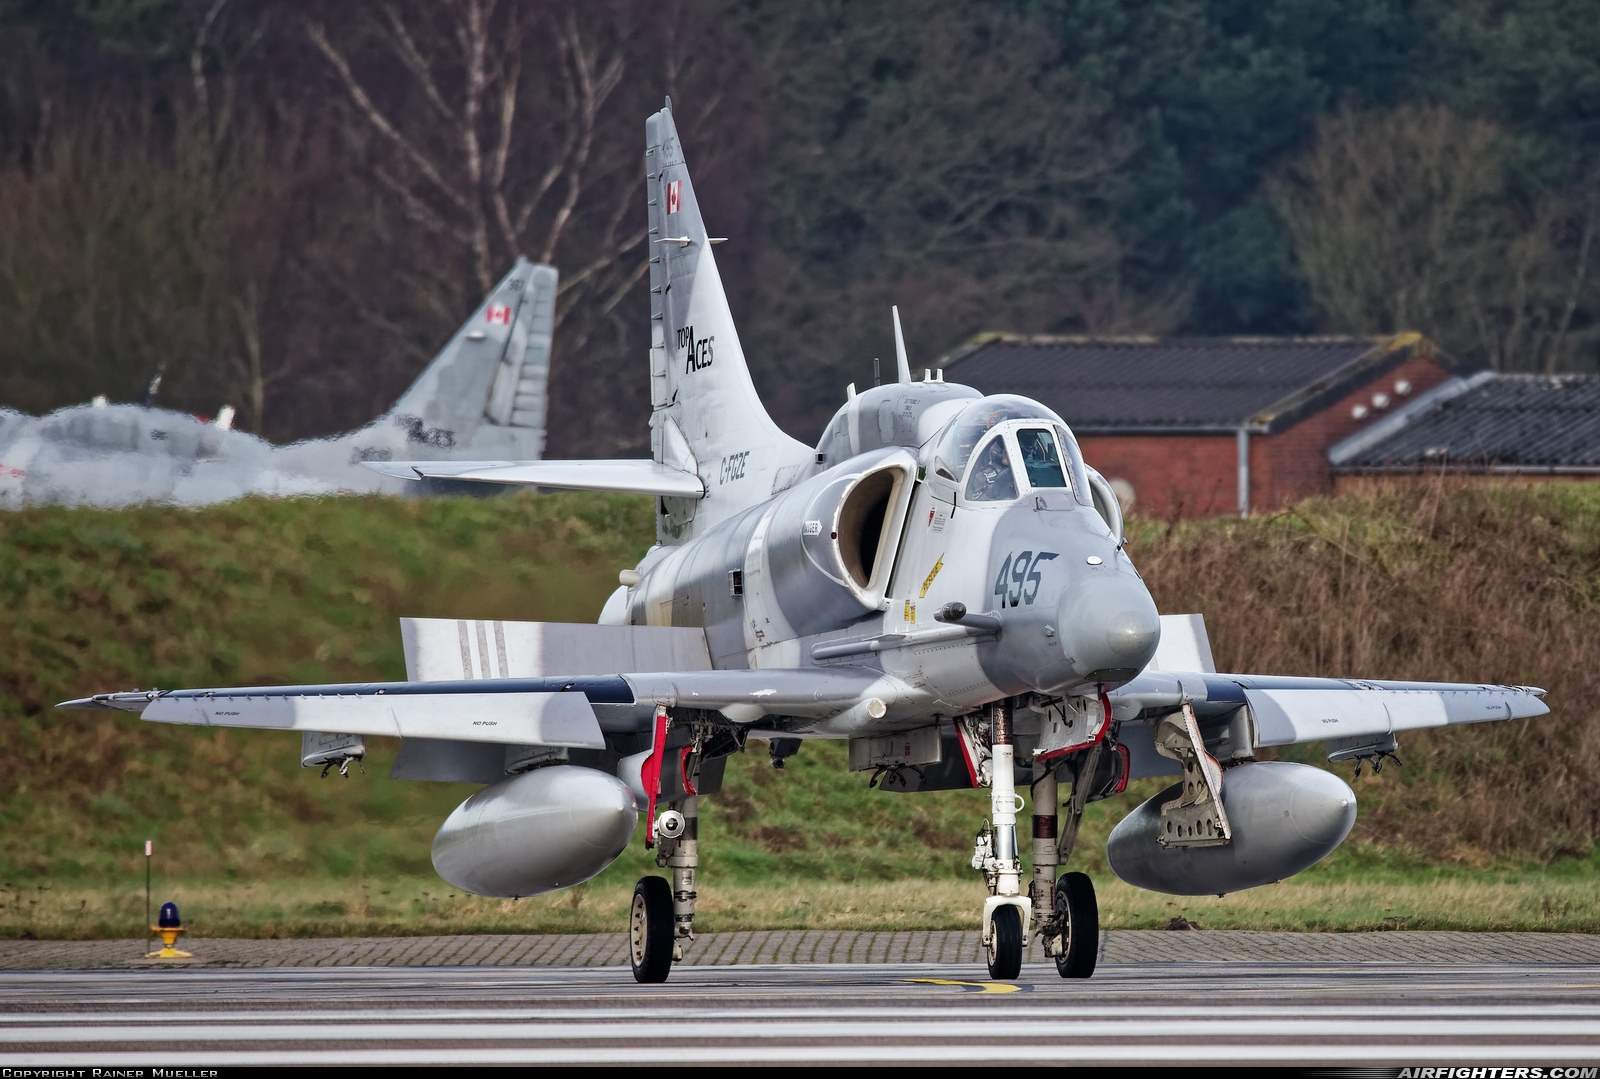 Company Owned - Top Aces (ATSI) Douglas A-4N Skyhawk C-FGZE at Wittmundhafen (Wittmund) (ETNT), Germany